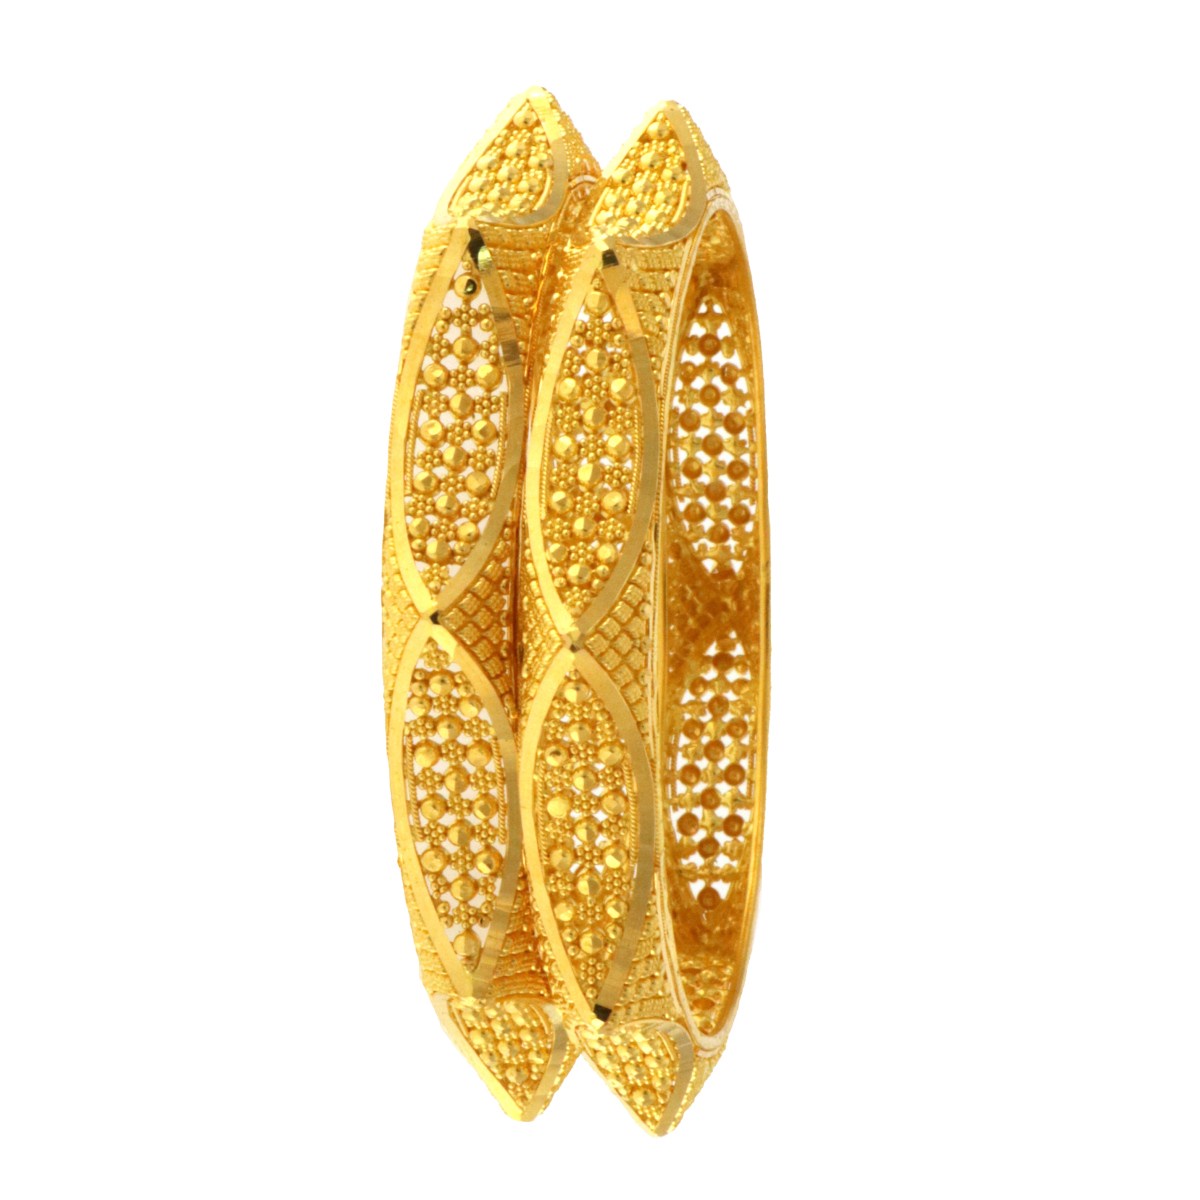 Asian Gold Bangles: A Timeless Tradition of Beauty and Culture